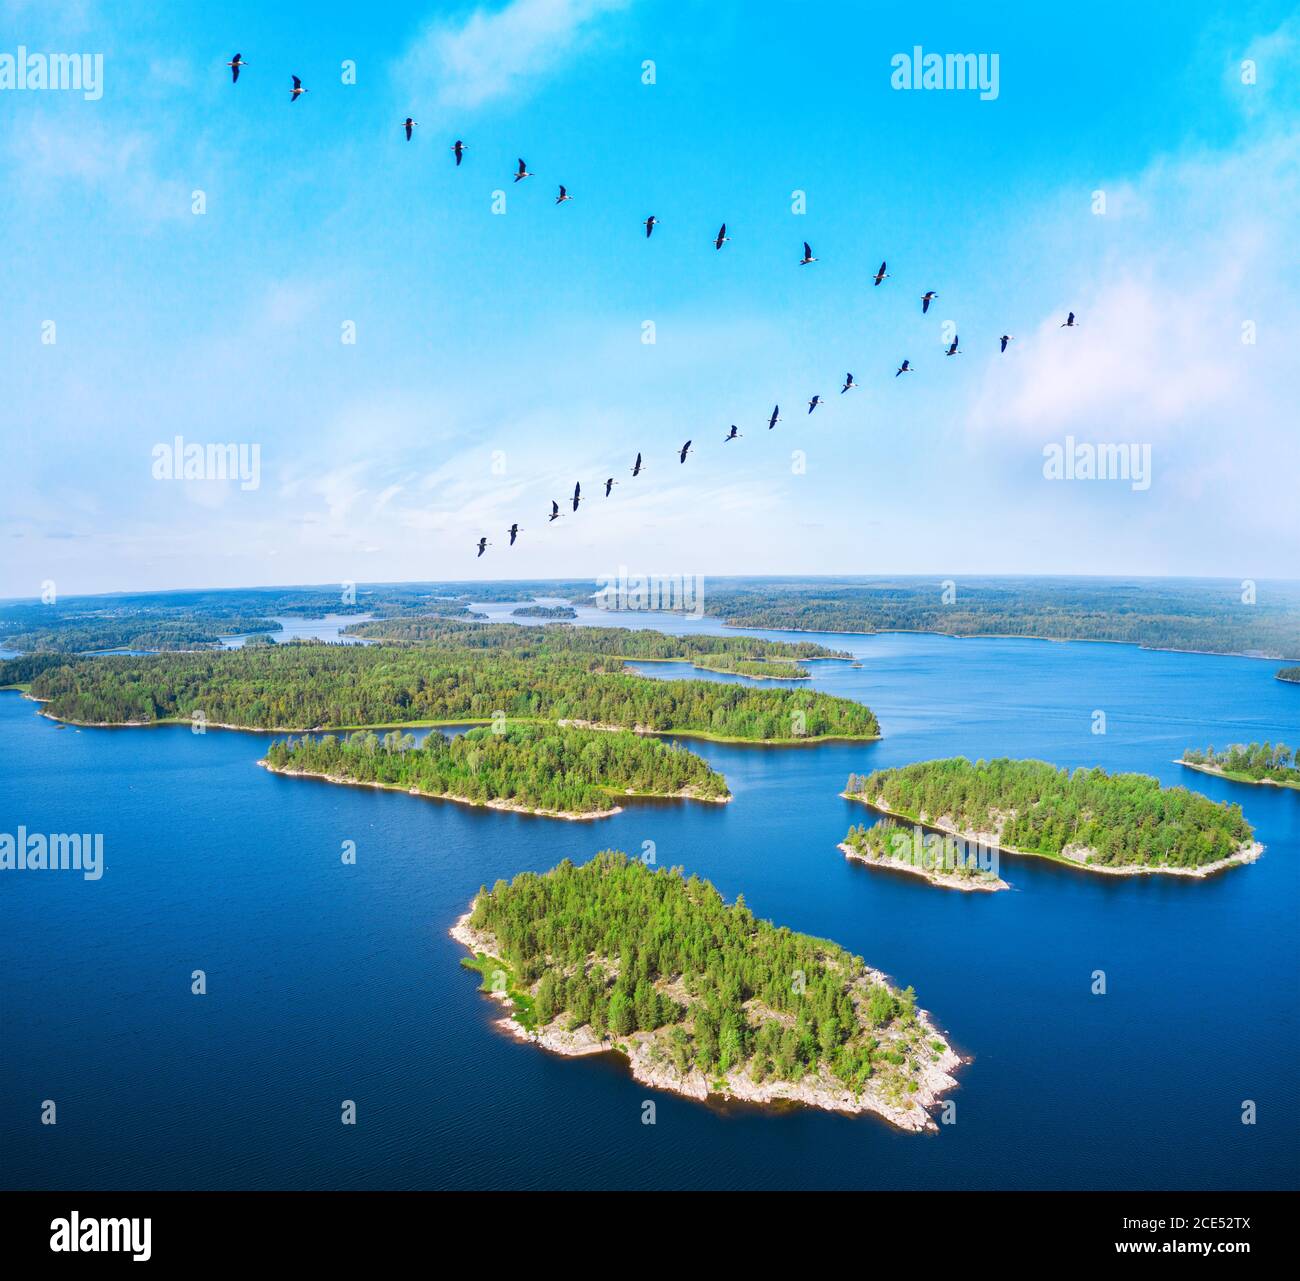 flock of migrating. Birds over beautiful blue lake with islands Stock Photo